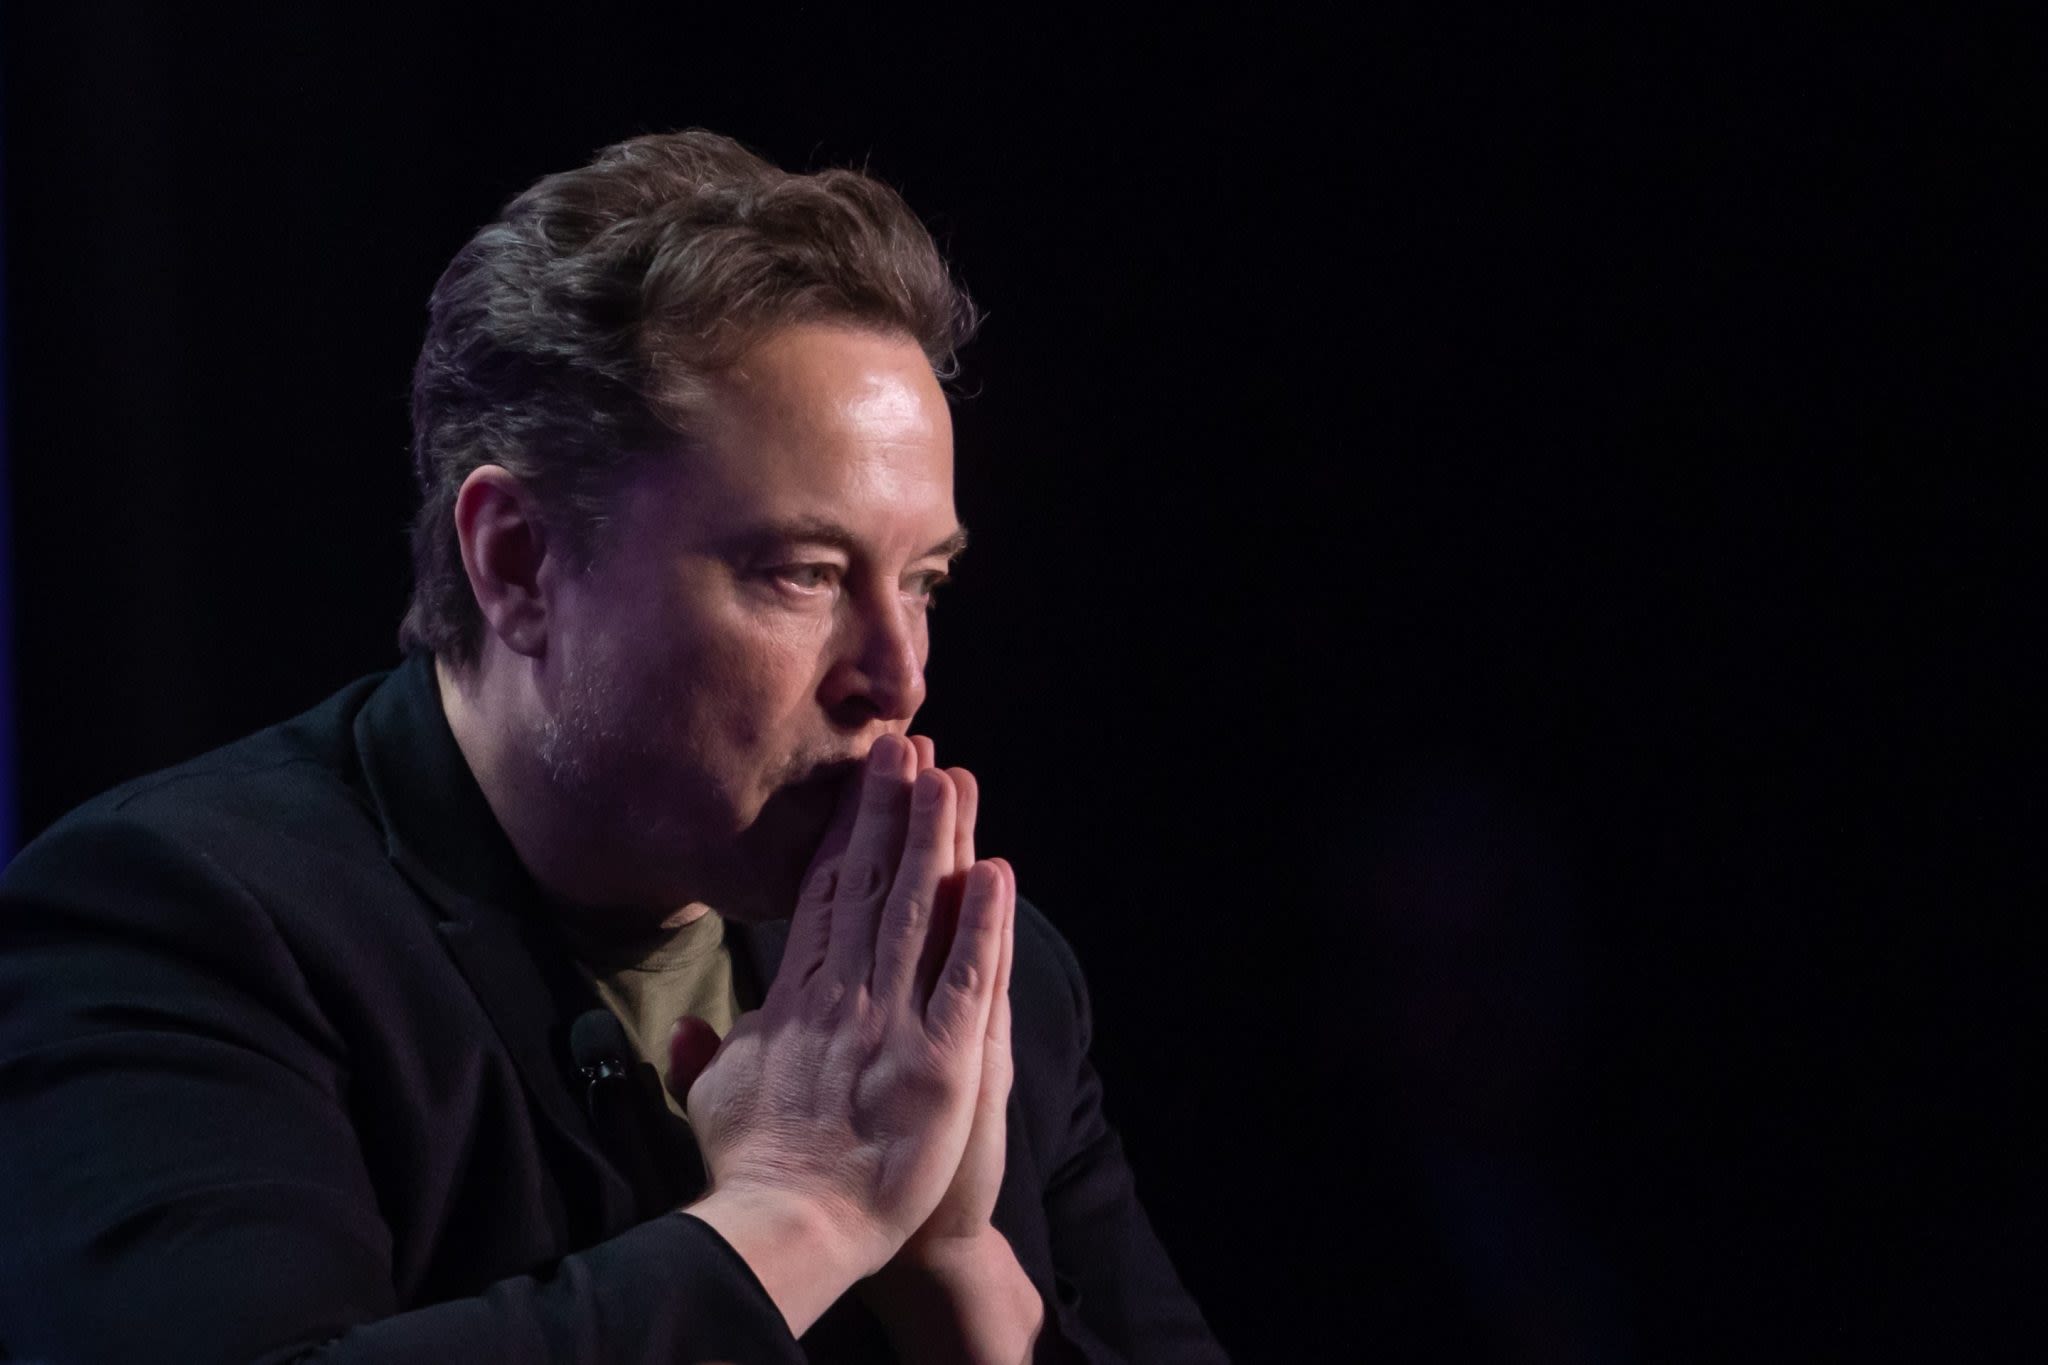 Tesla shareholders’ vote on Elon Musk’s record $56 billion pay deal could be his ‘last stand’ as CEO, experts warn